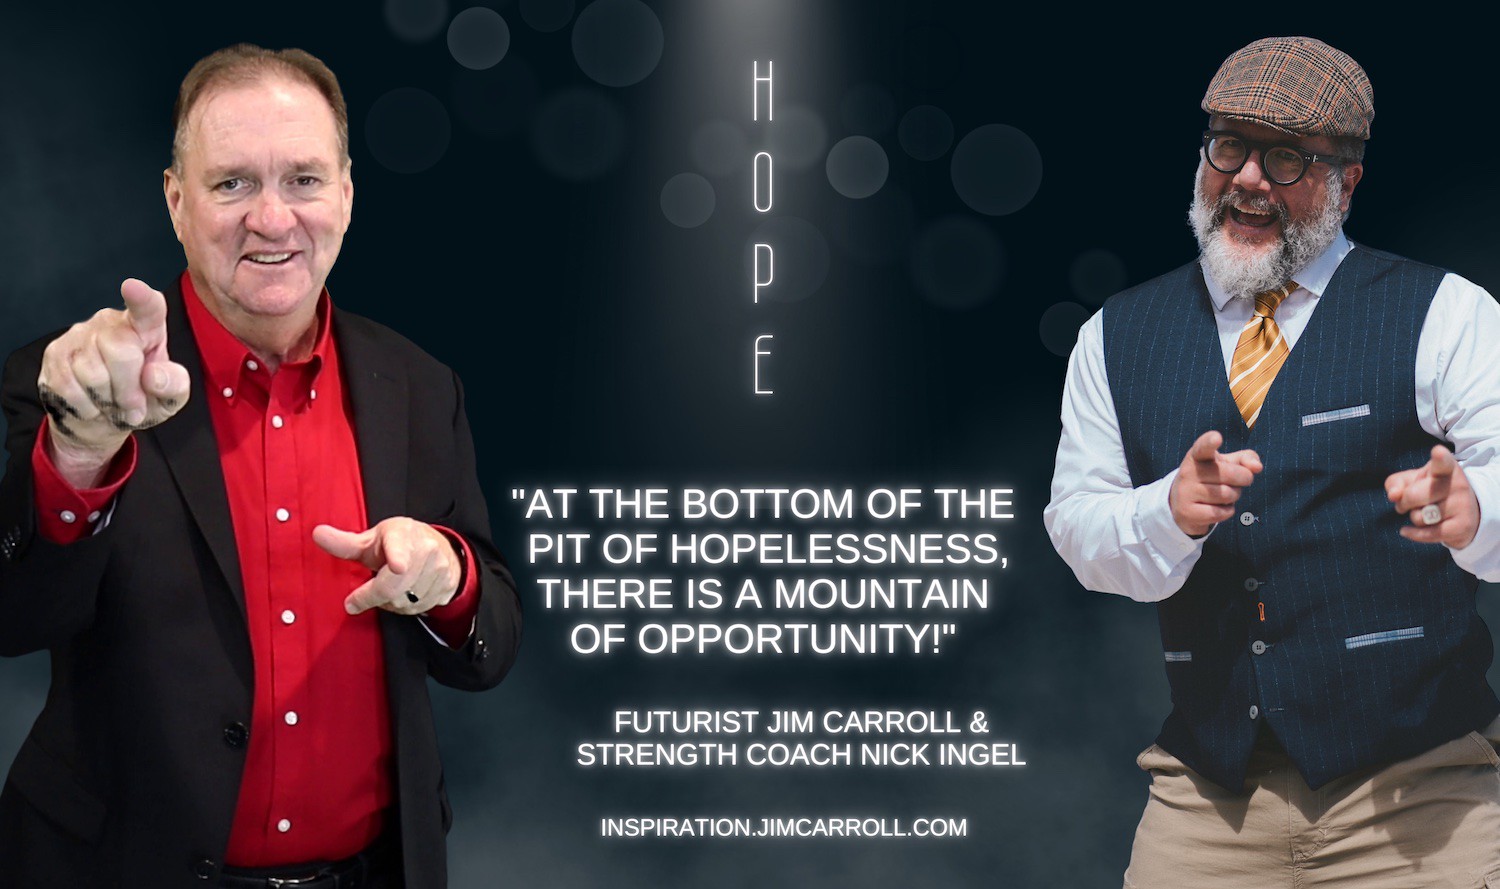 "At the bottom of the pit of hopelessness, there is a mountain of opportunity!" - Futurist Jim Carroll